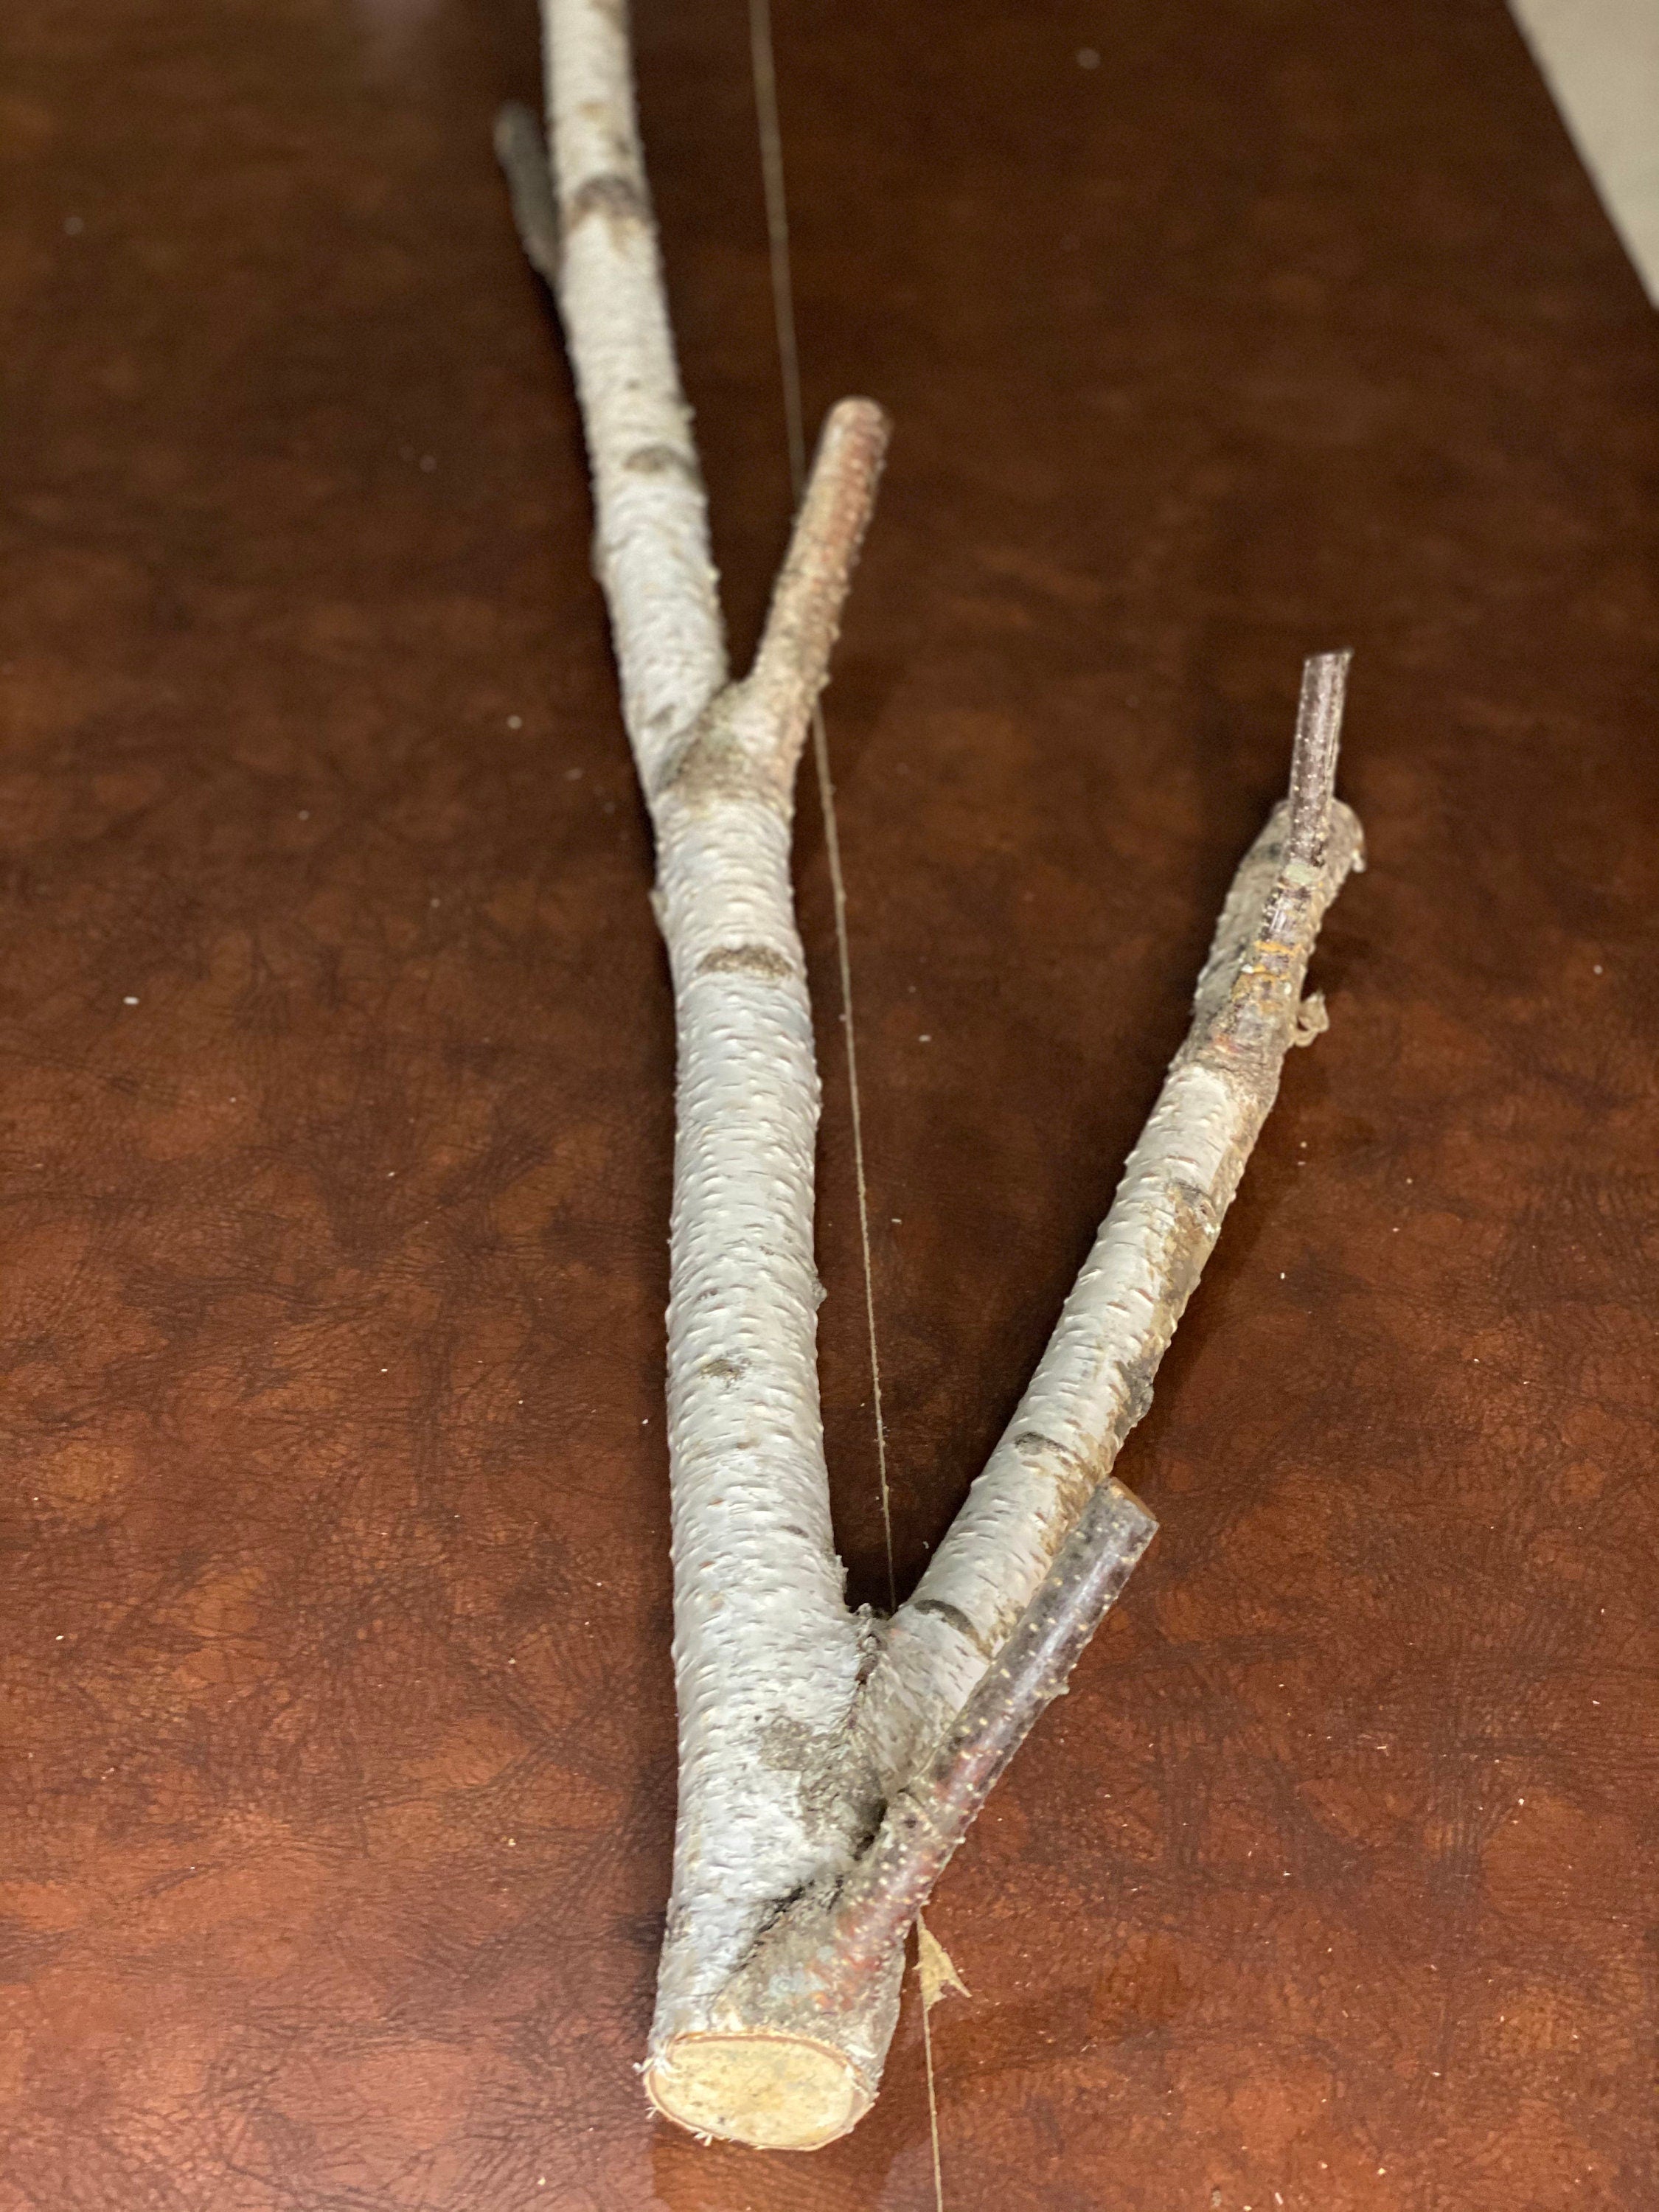 White Birch Log, Parrot Perch, Approximately 39 Inches Long by 1.5 Inches Wide, 1 Inch Thick